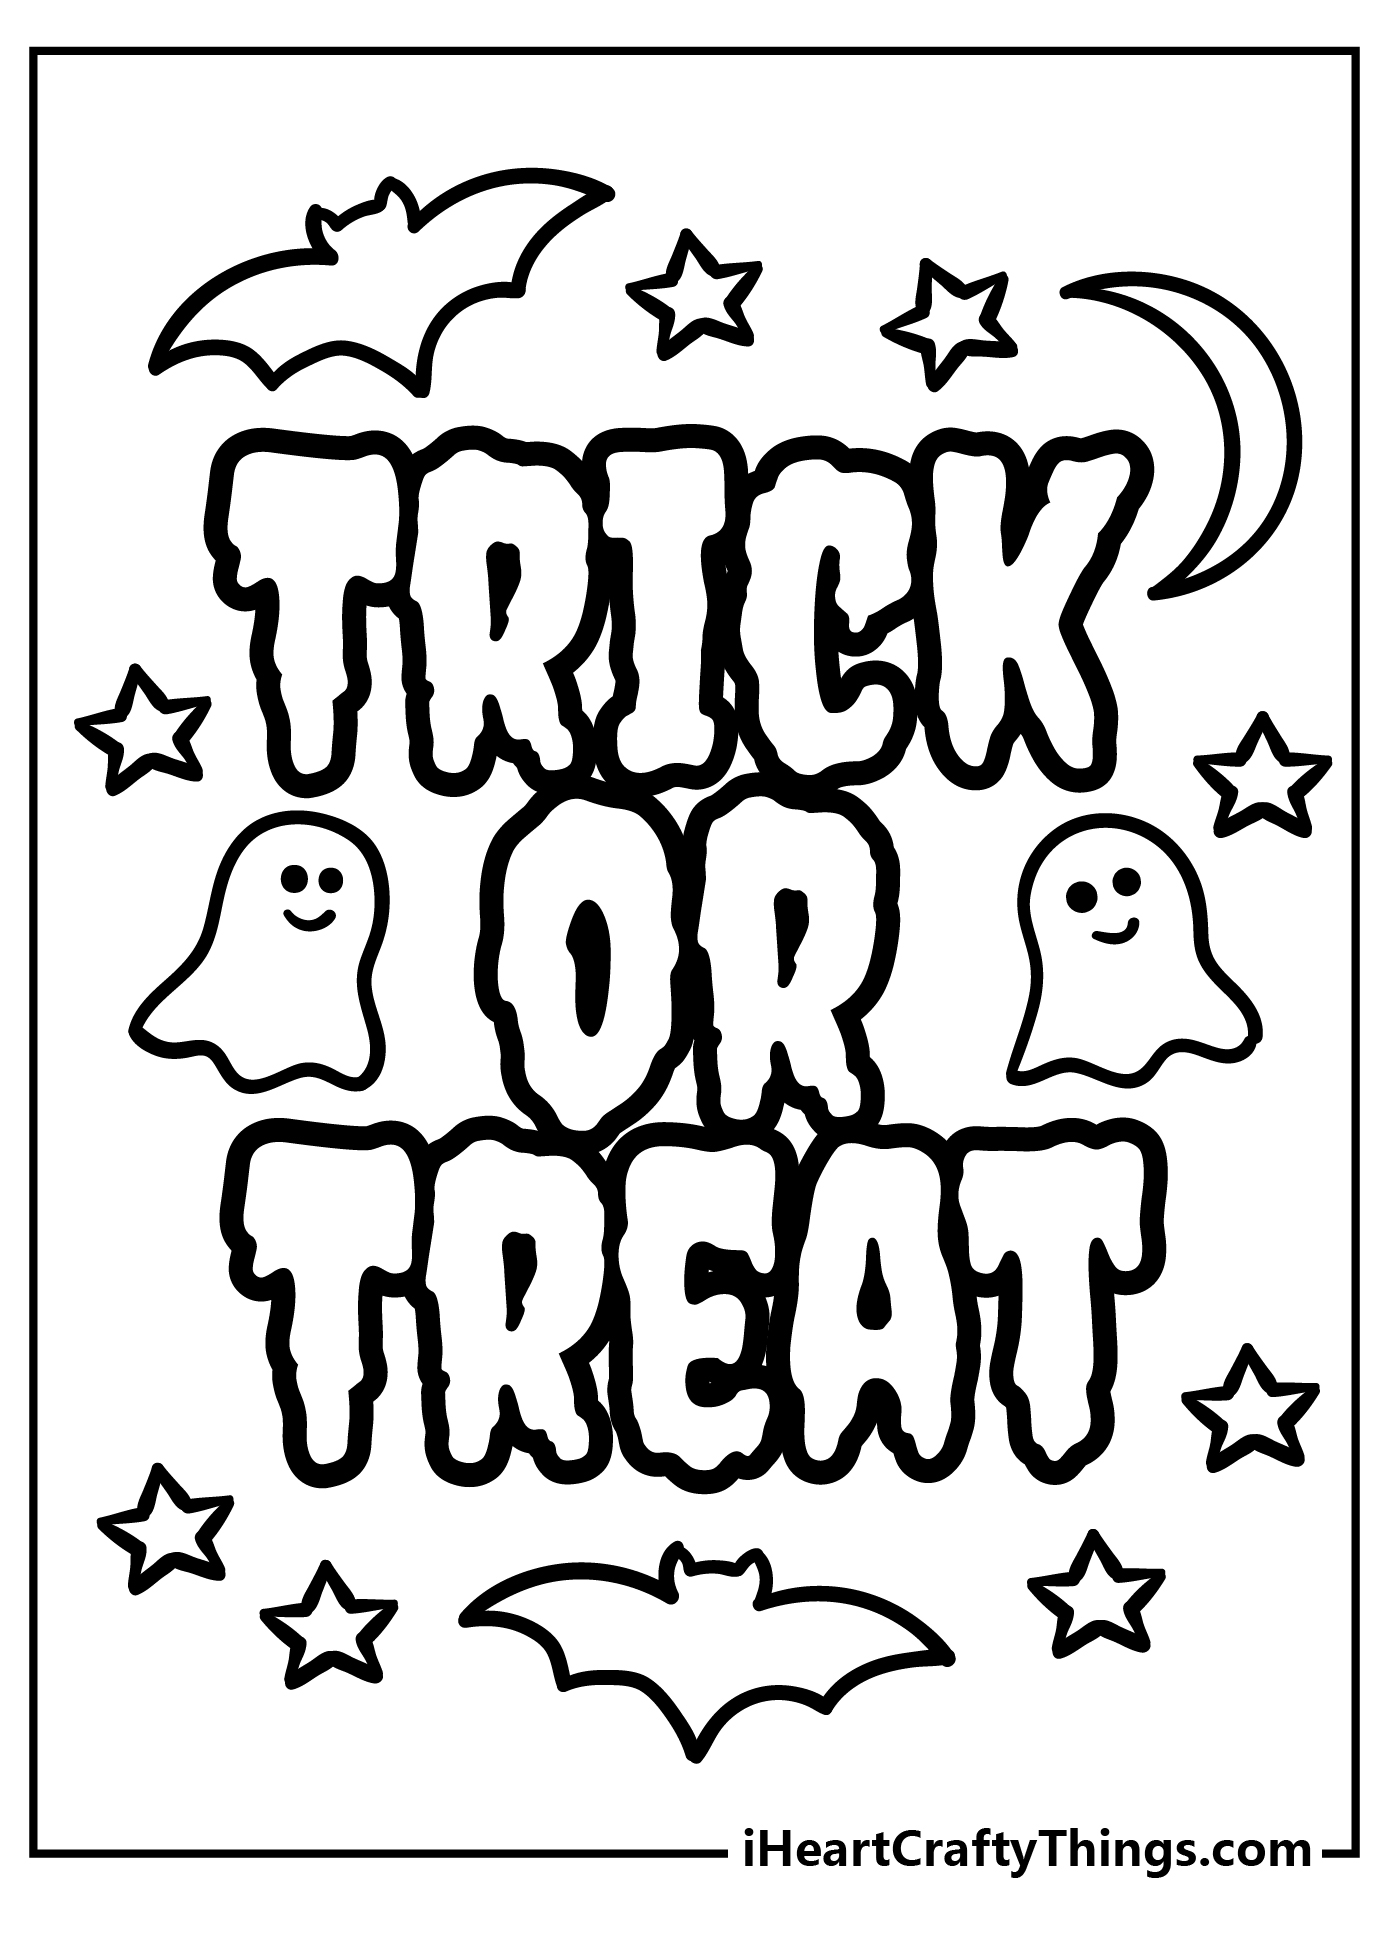 Trick or treat coloring pages free printables